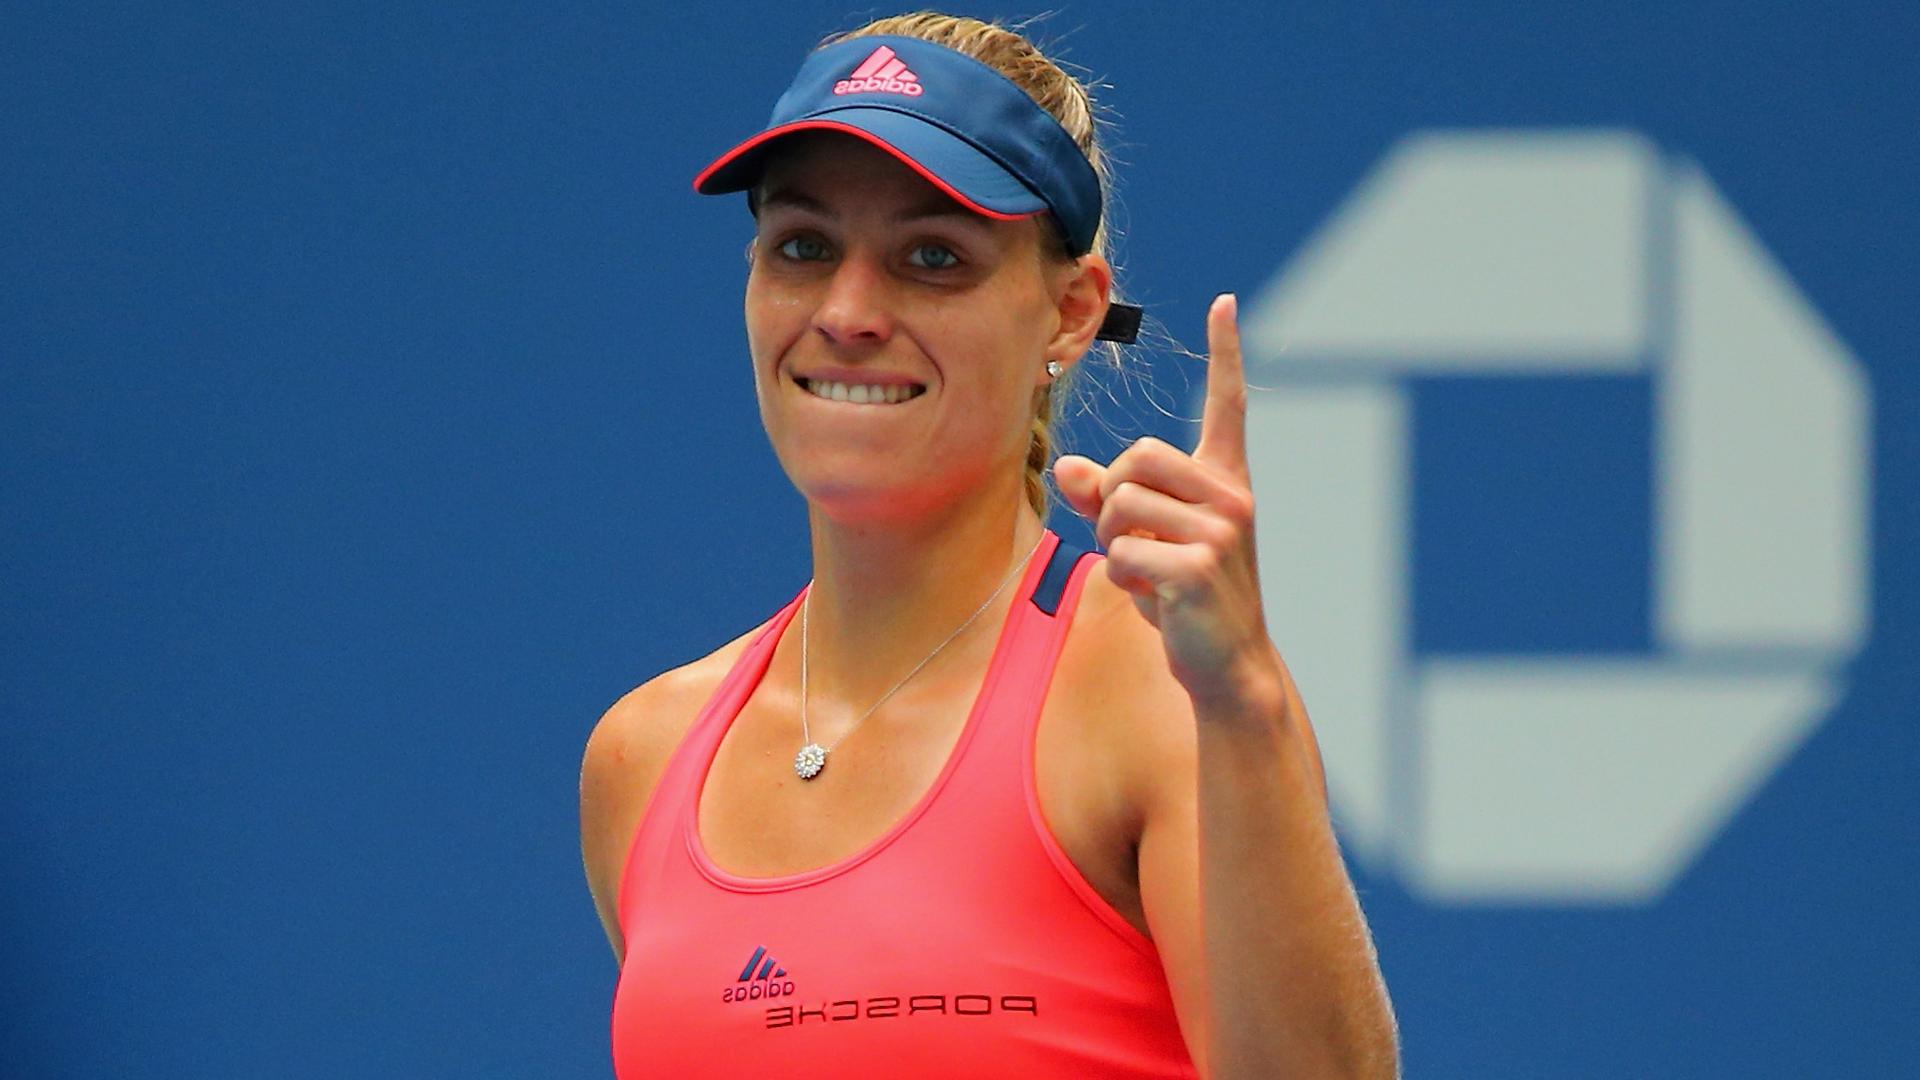 A picture of tennis player Angelique Kerber on the court